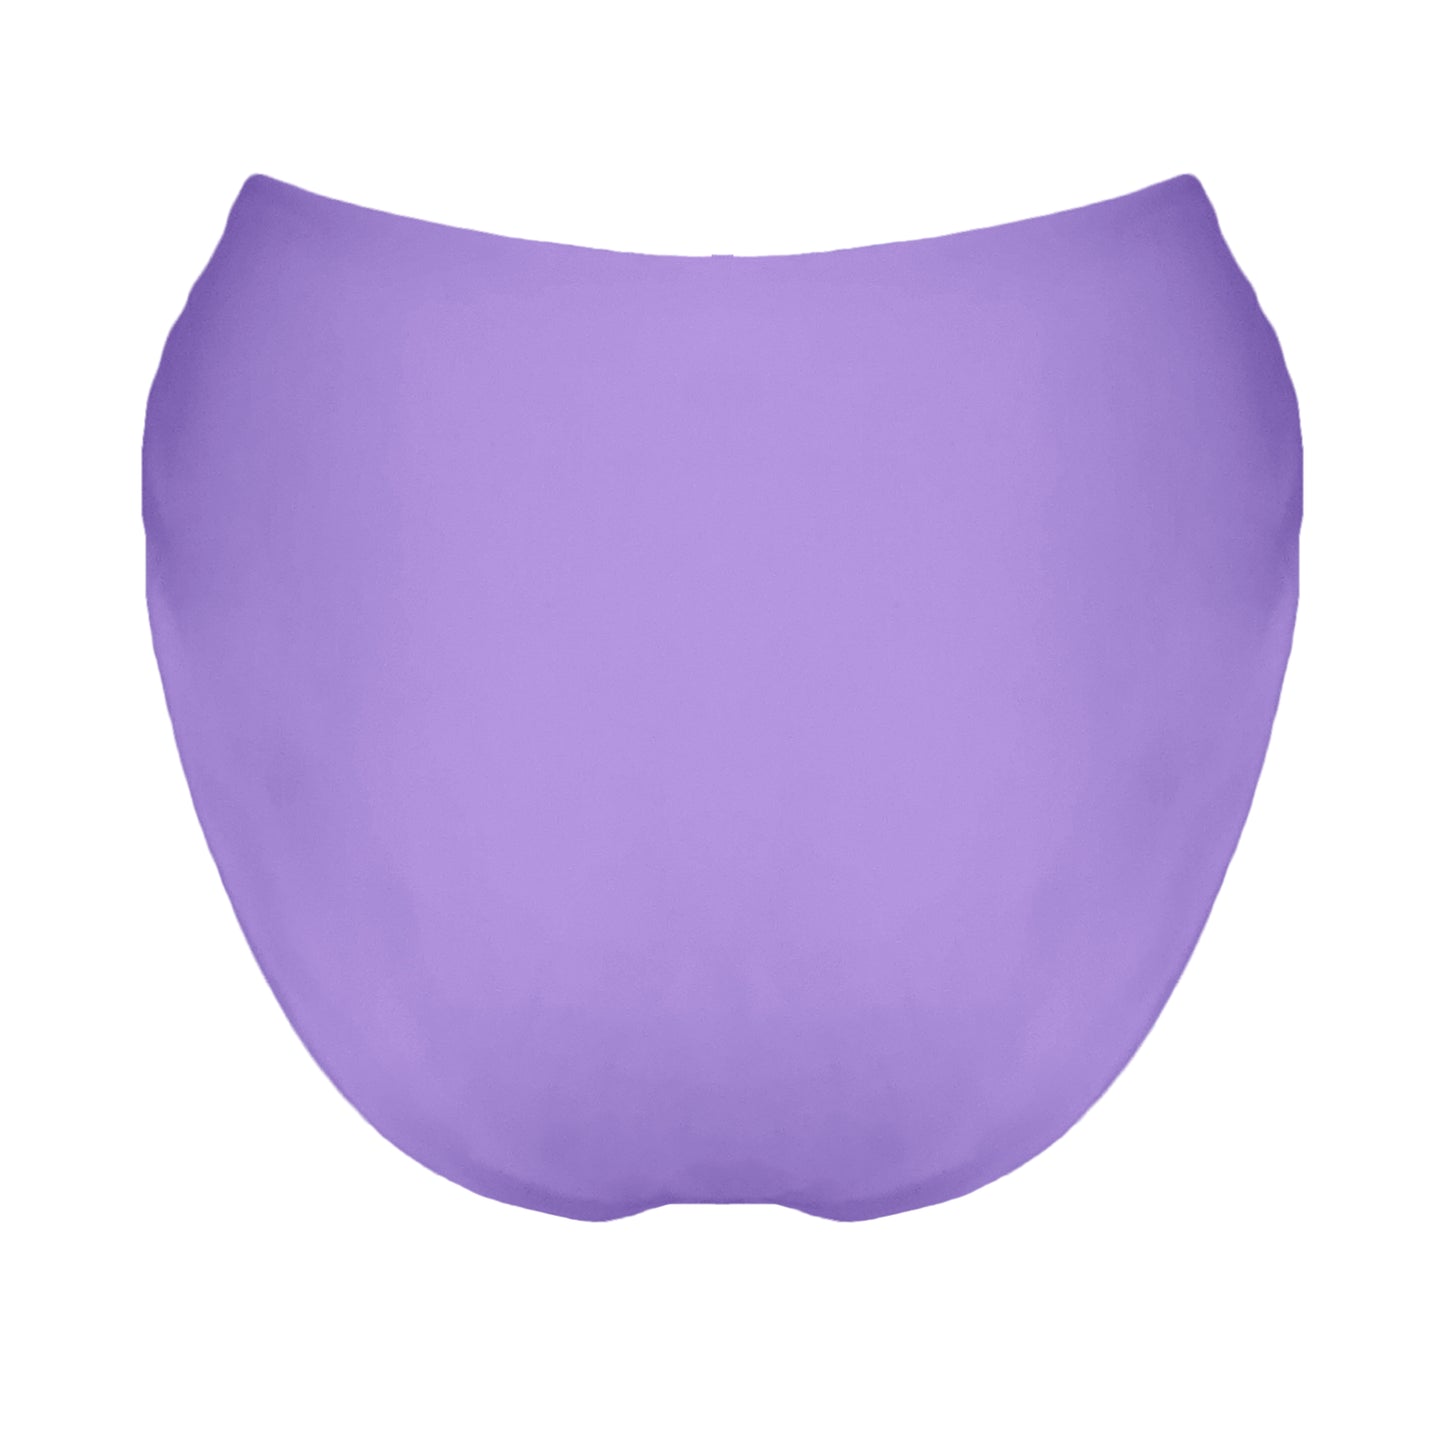 Back view of pastel purple V-front mid rise bikini bottom with high cut sides and cheeky coverage.